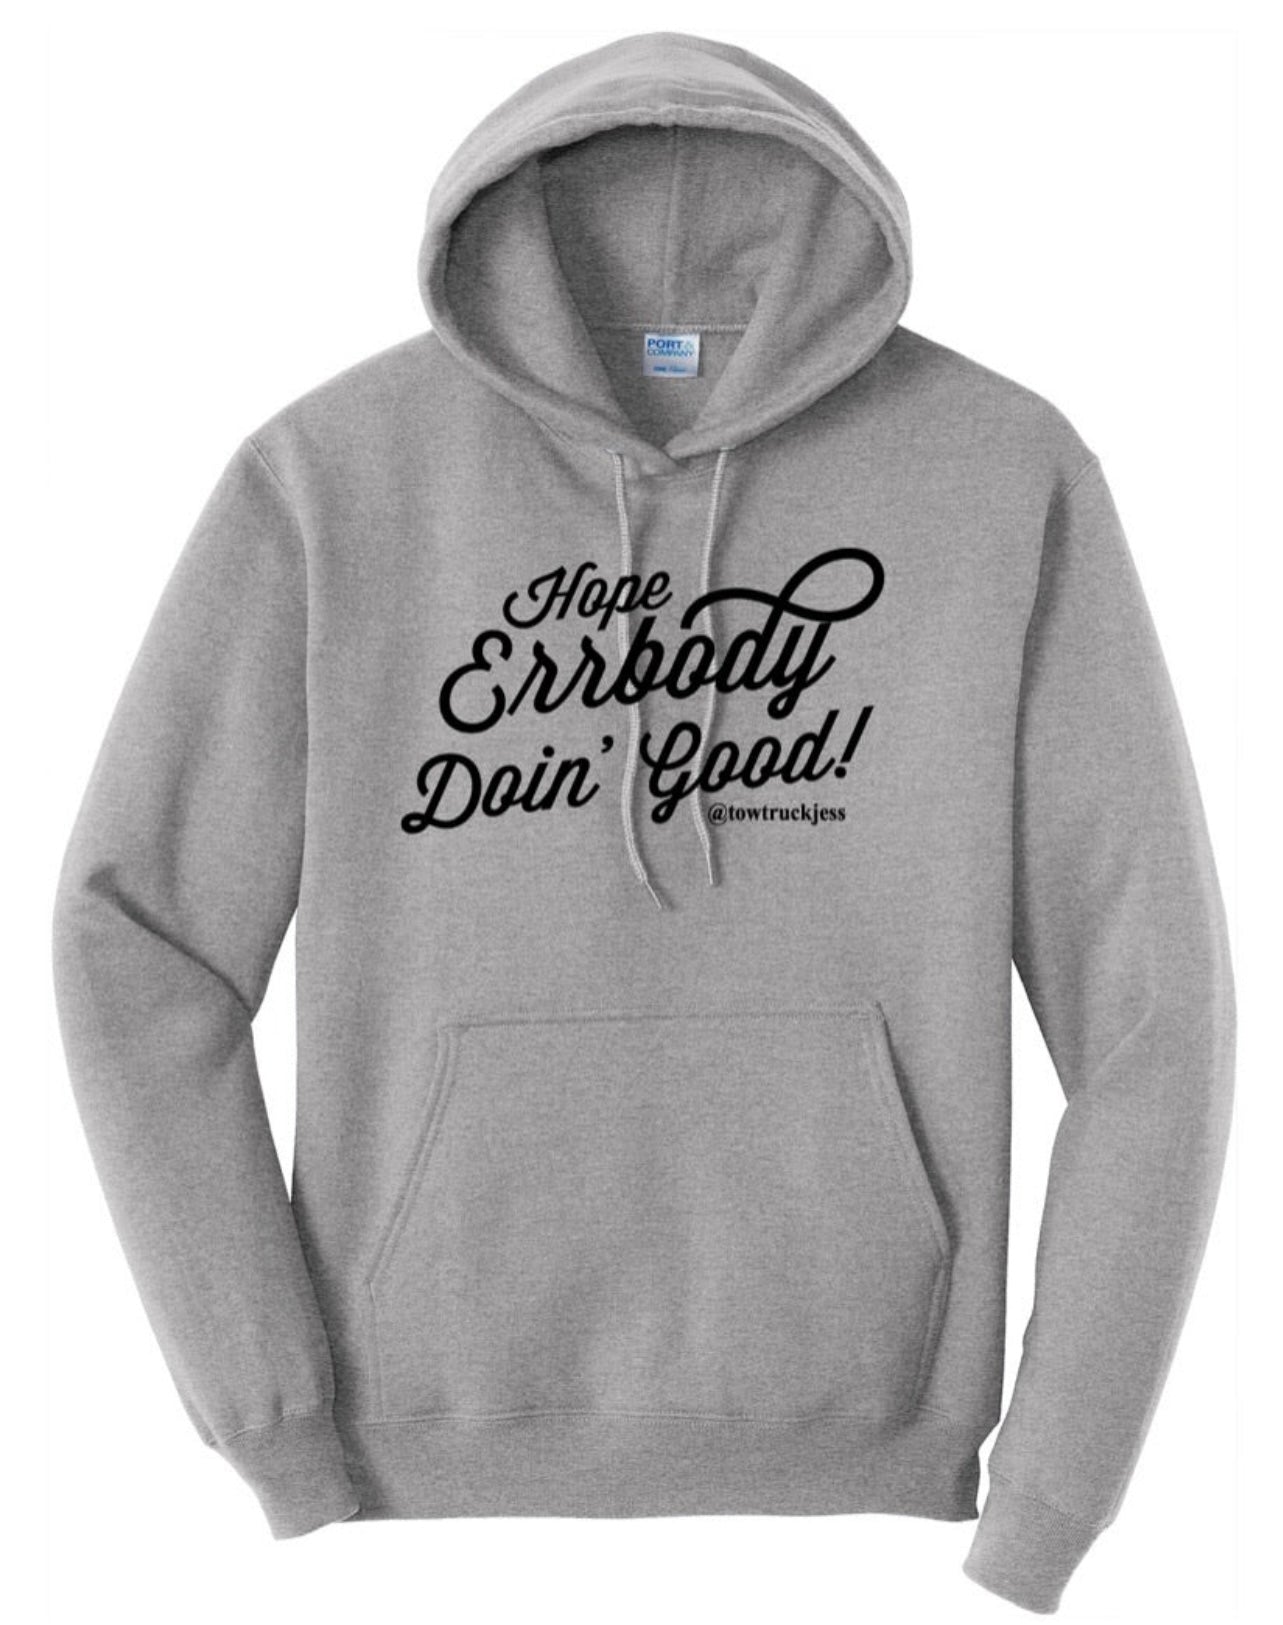 A BIG SAVE $10 OFF Heather Grey with Black Logo Hope Errbody Doin’ Good Tow Truck Jess Hoodie *WHILE SUPPLIES LAST*